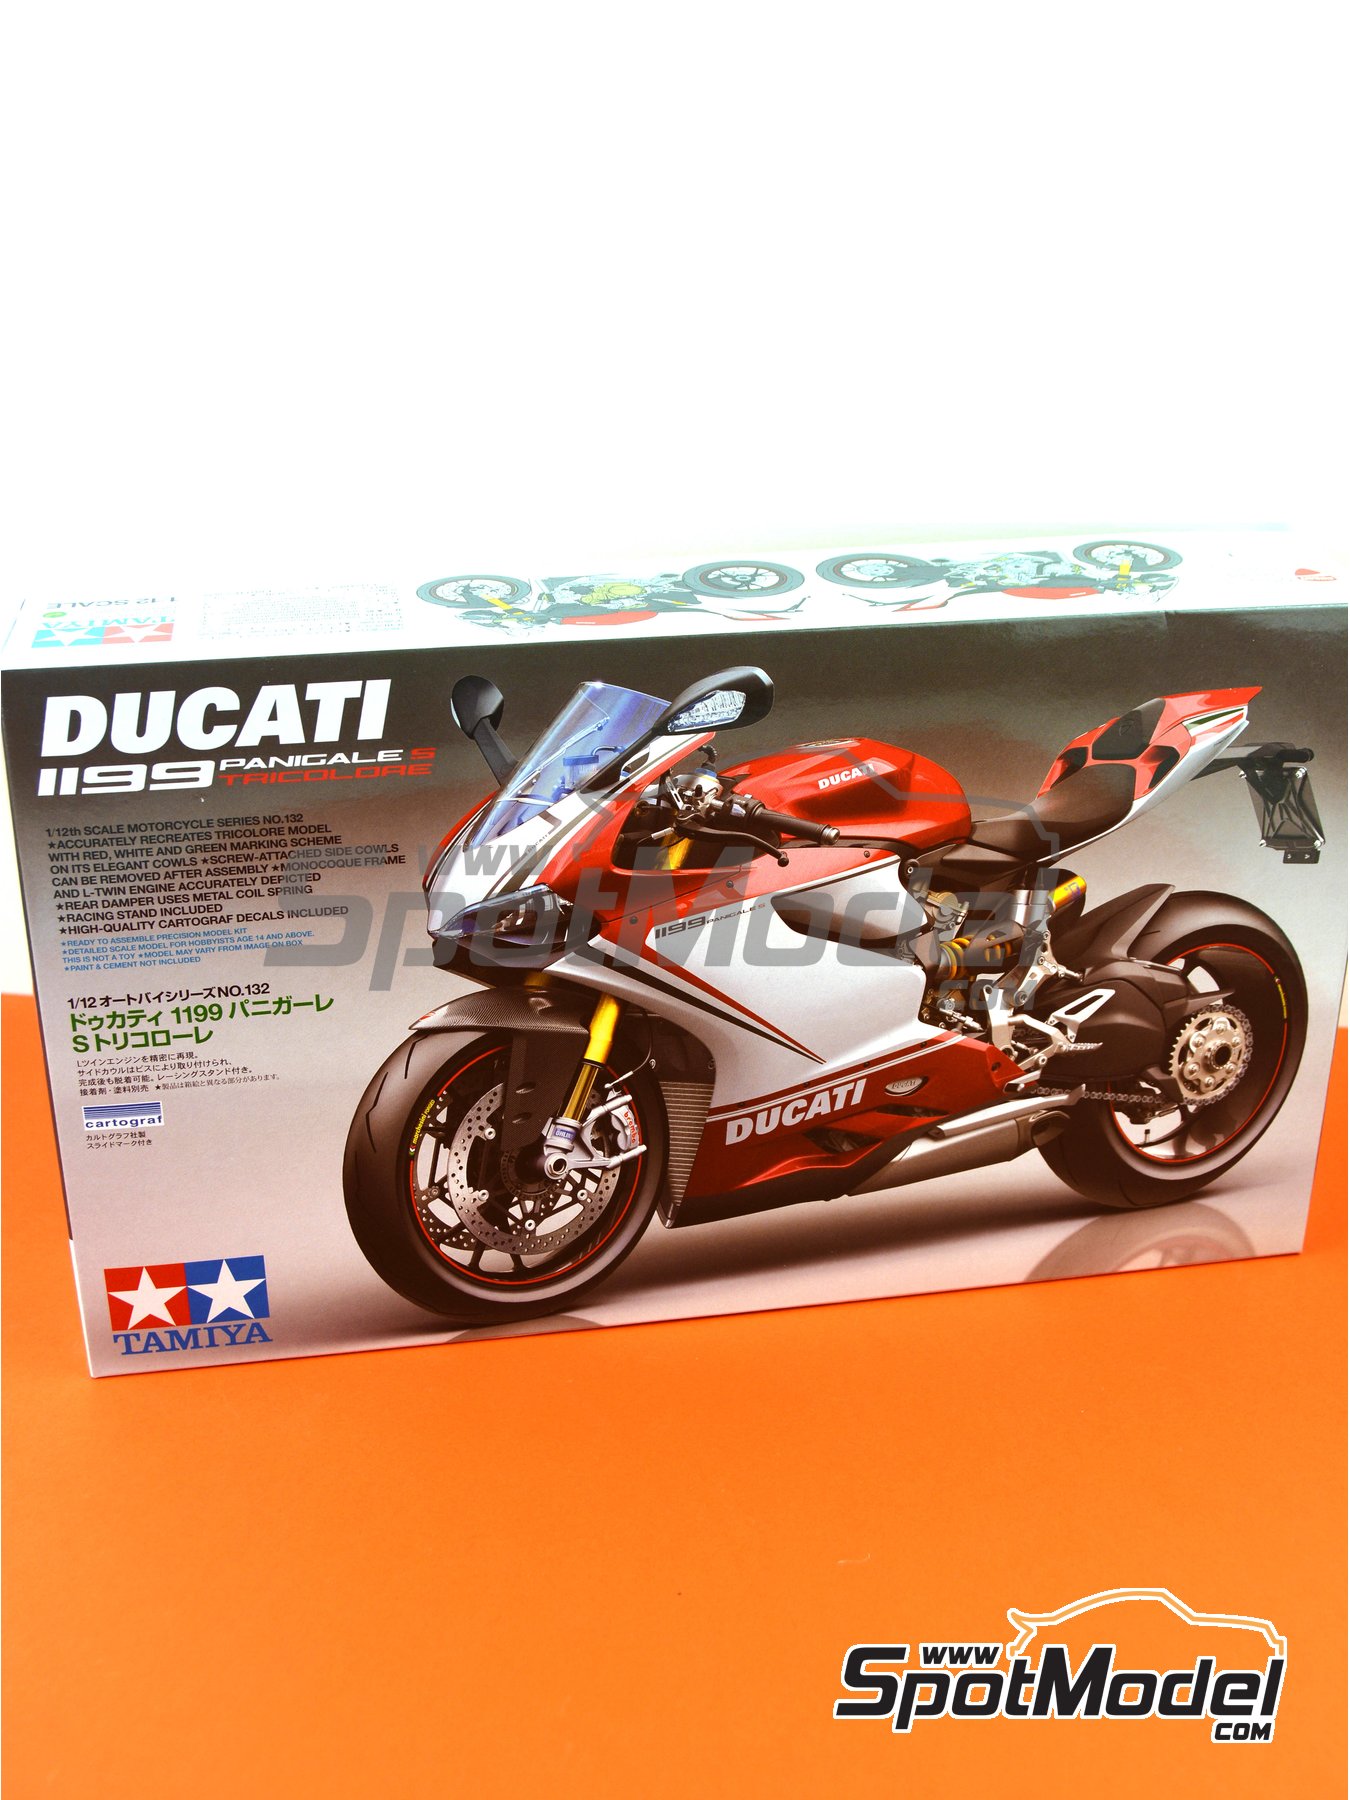 Tamiya 1/12 Ducati 1199 Panigale S Tricolore Motorcycle Tam14132 for sale online 